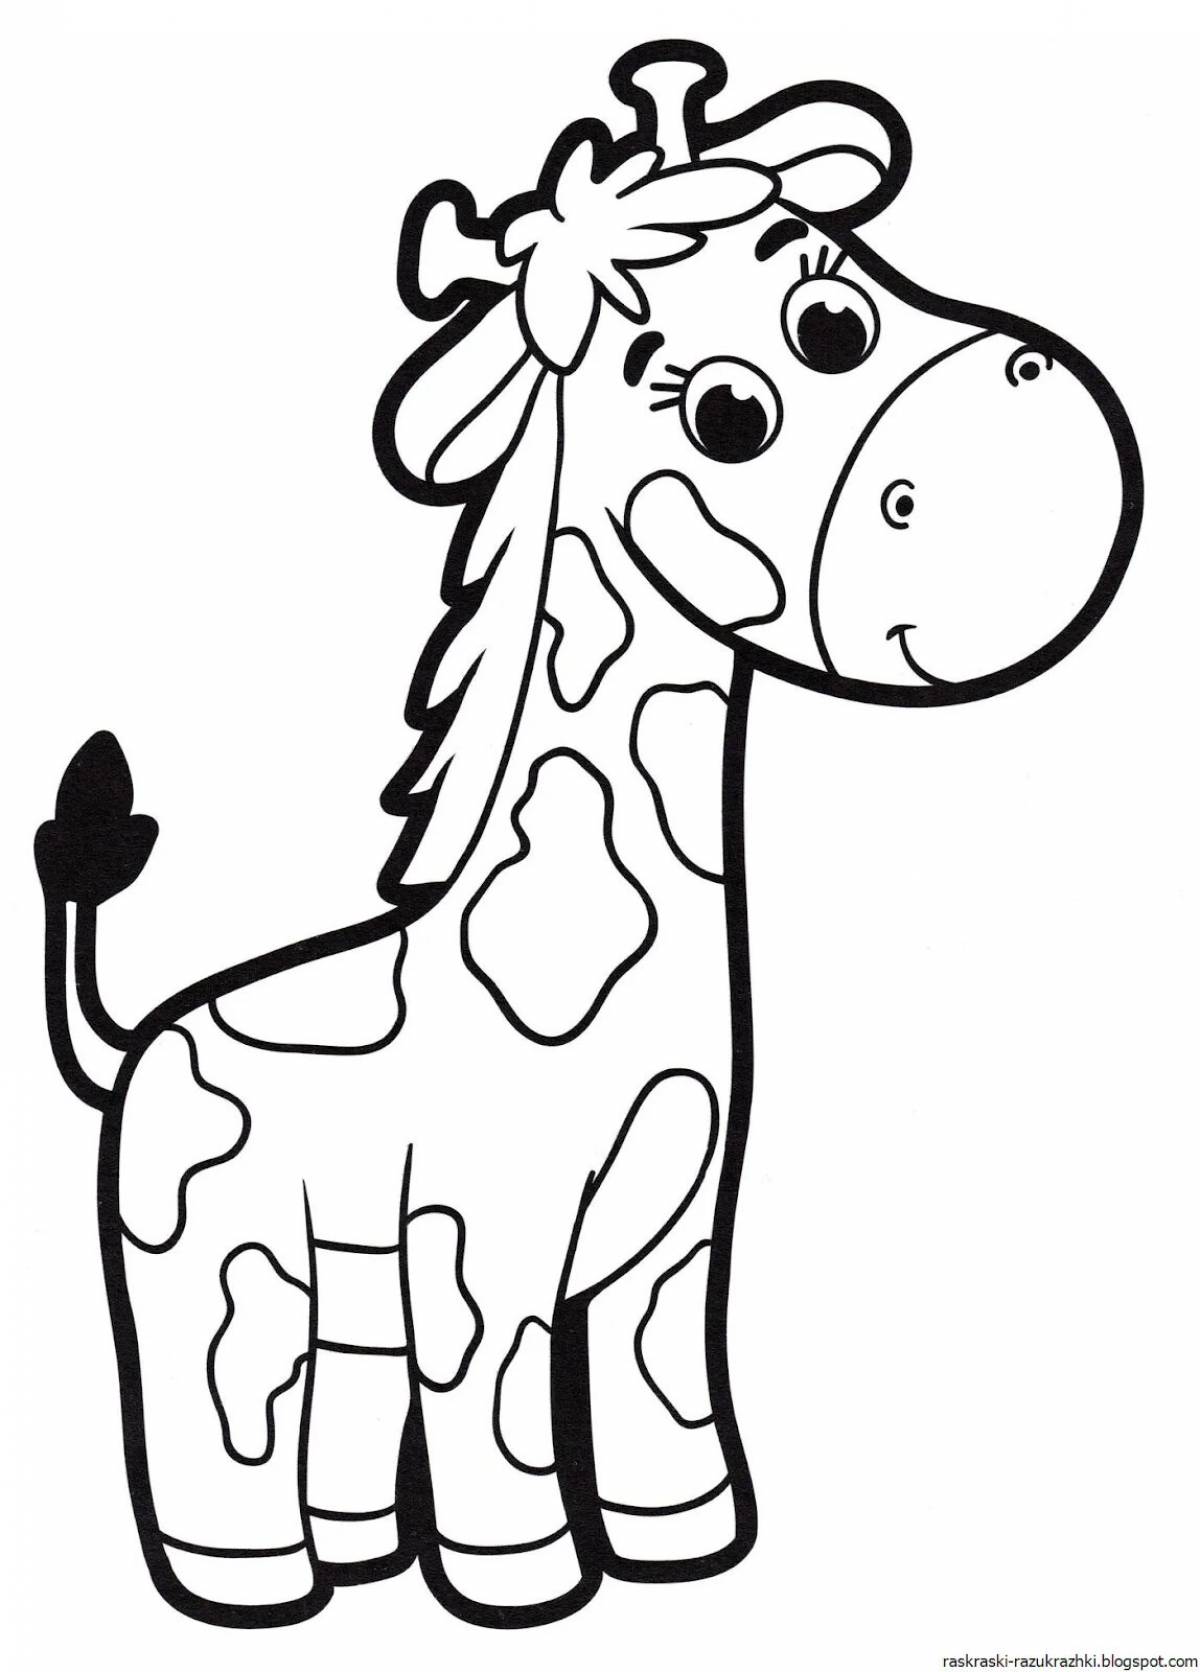 Great drawing of a giraffe for kids